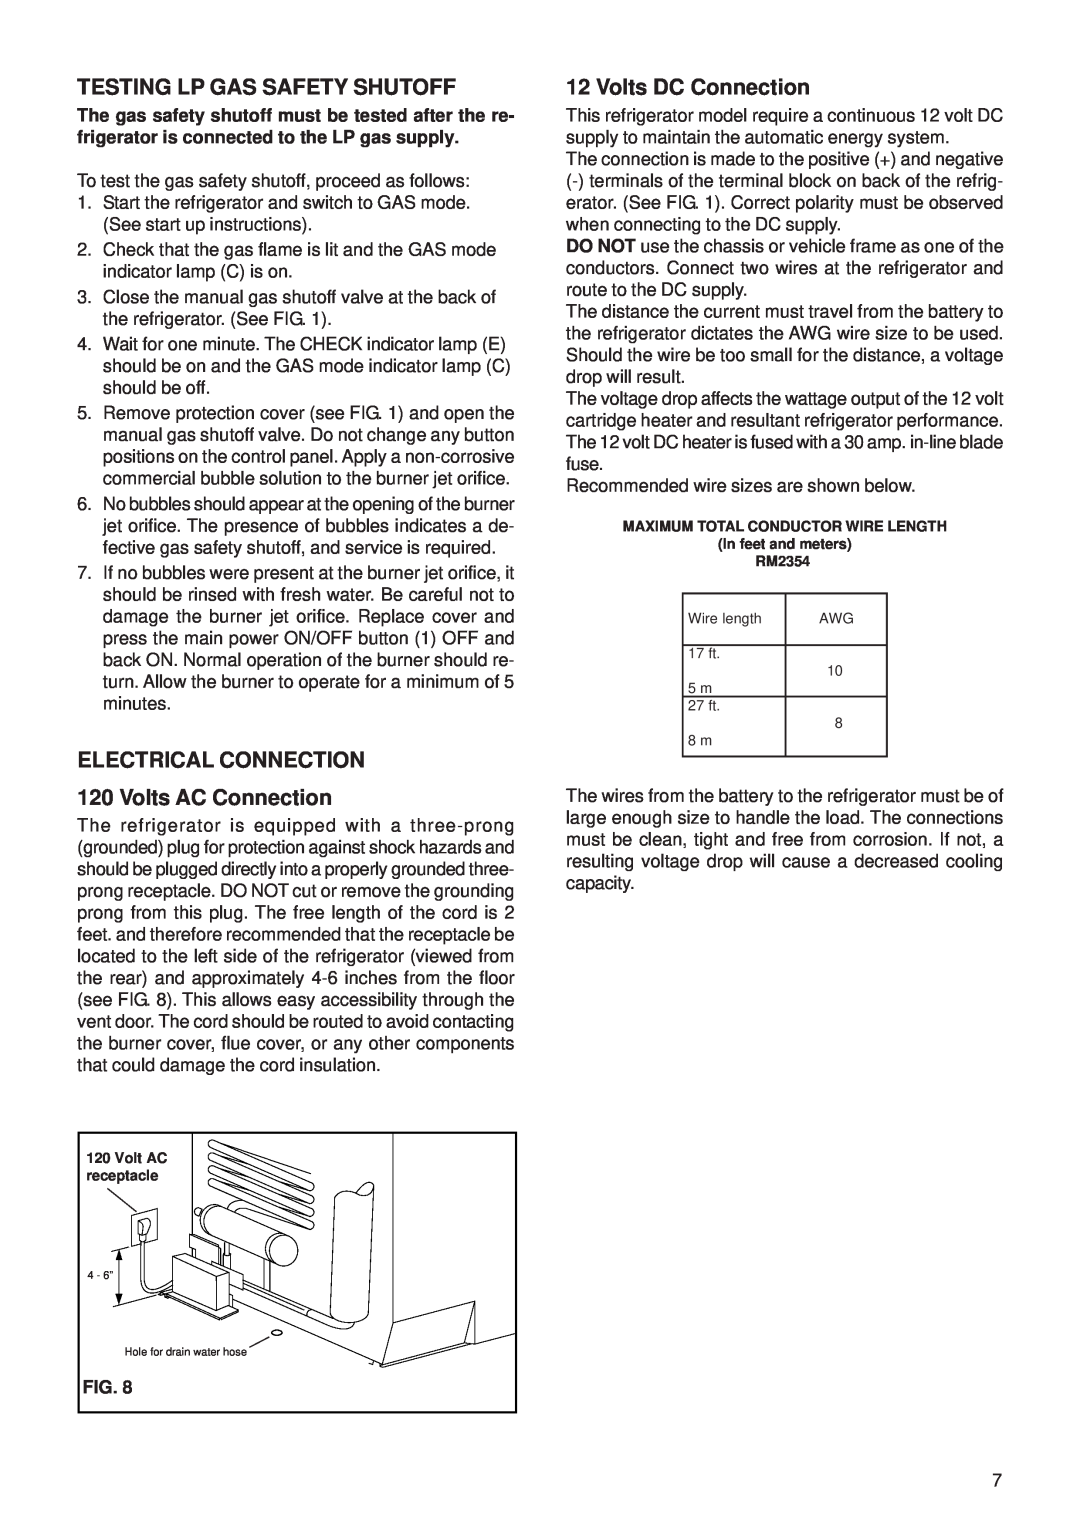 Dometic RM2354 manual Testing Lp Gas Safety Shutoff, ELECTRICAL CONNECTION 120 Volts AC Connection, Volts DC Connection 